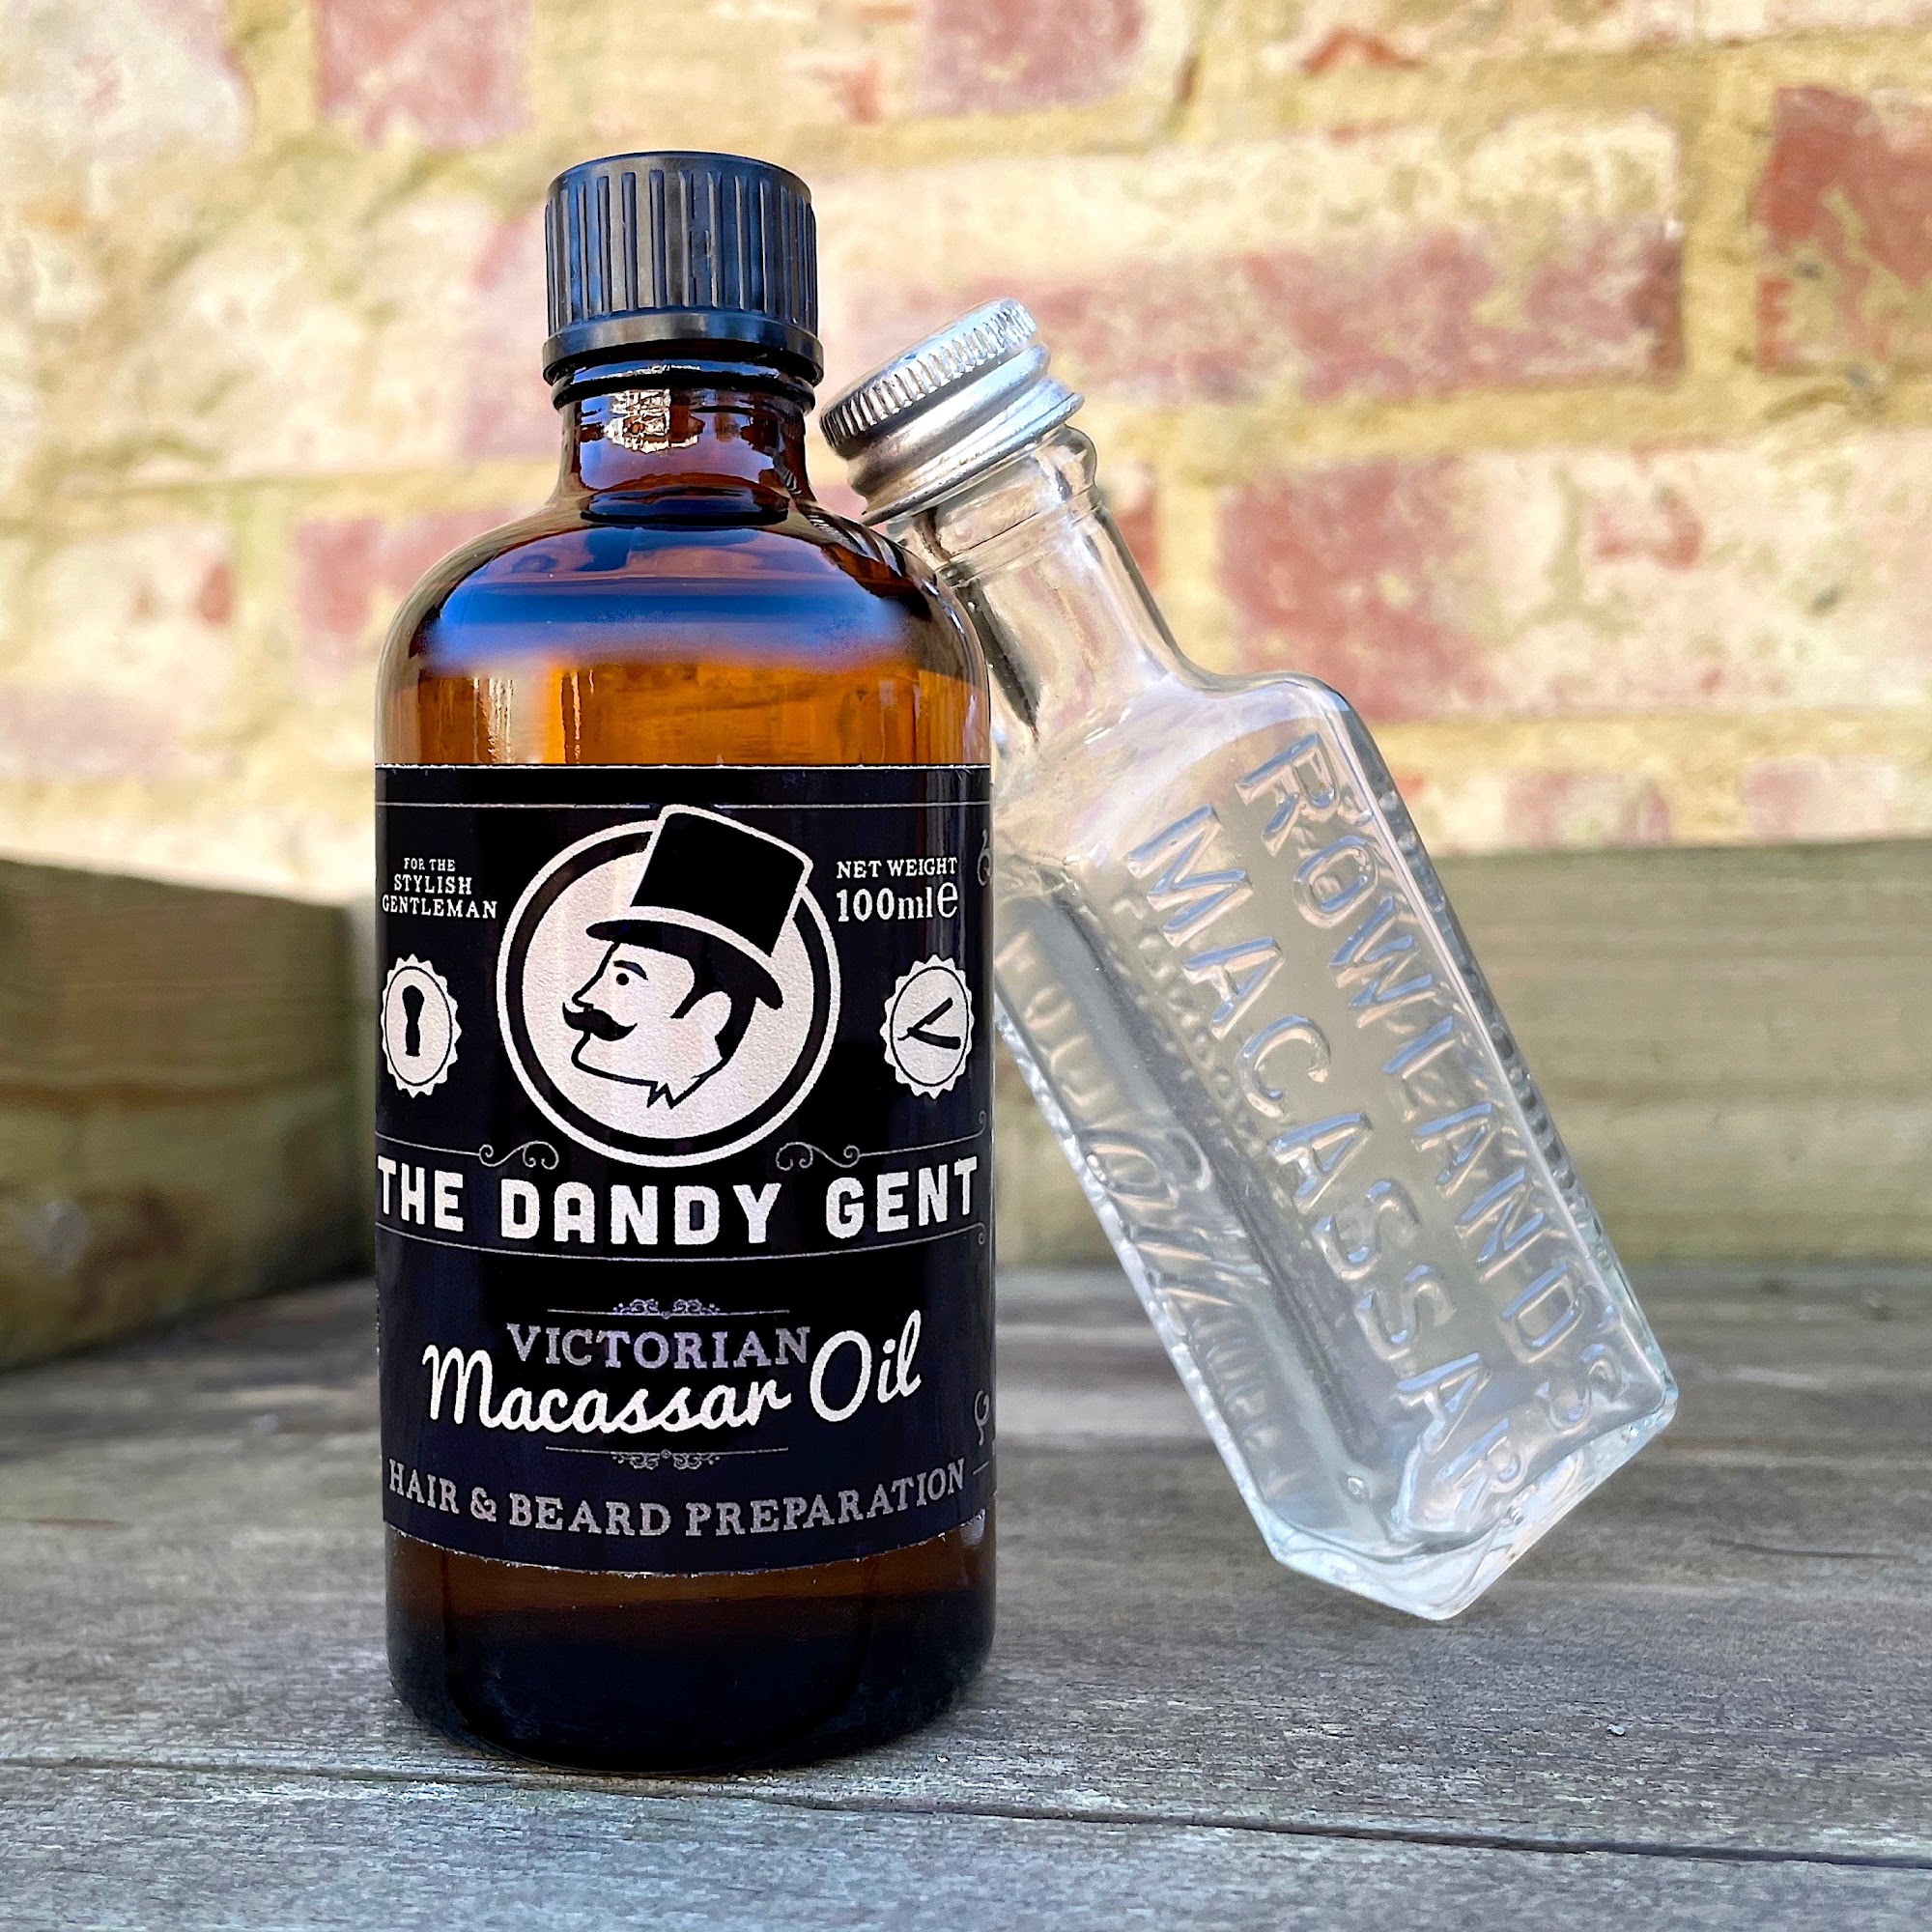 Bottles of Rowland's and The Dandy Gent's Victorian Macassar Oil